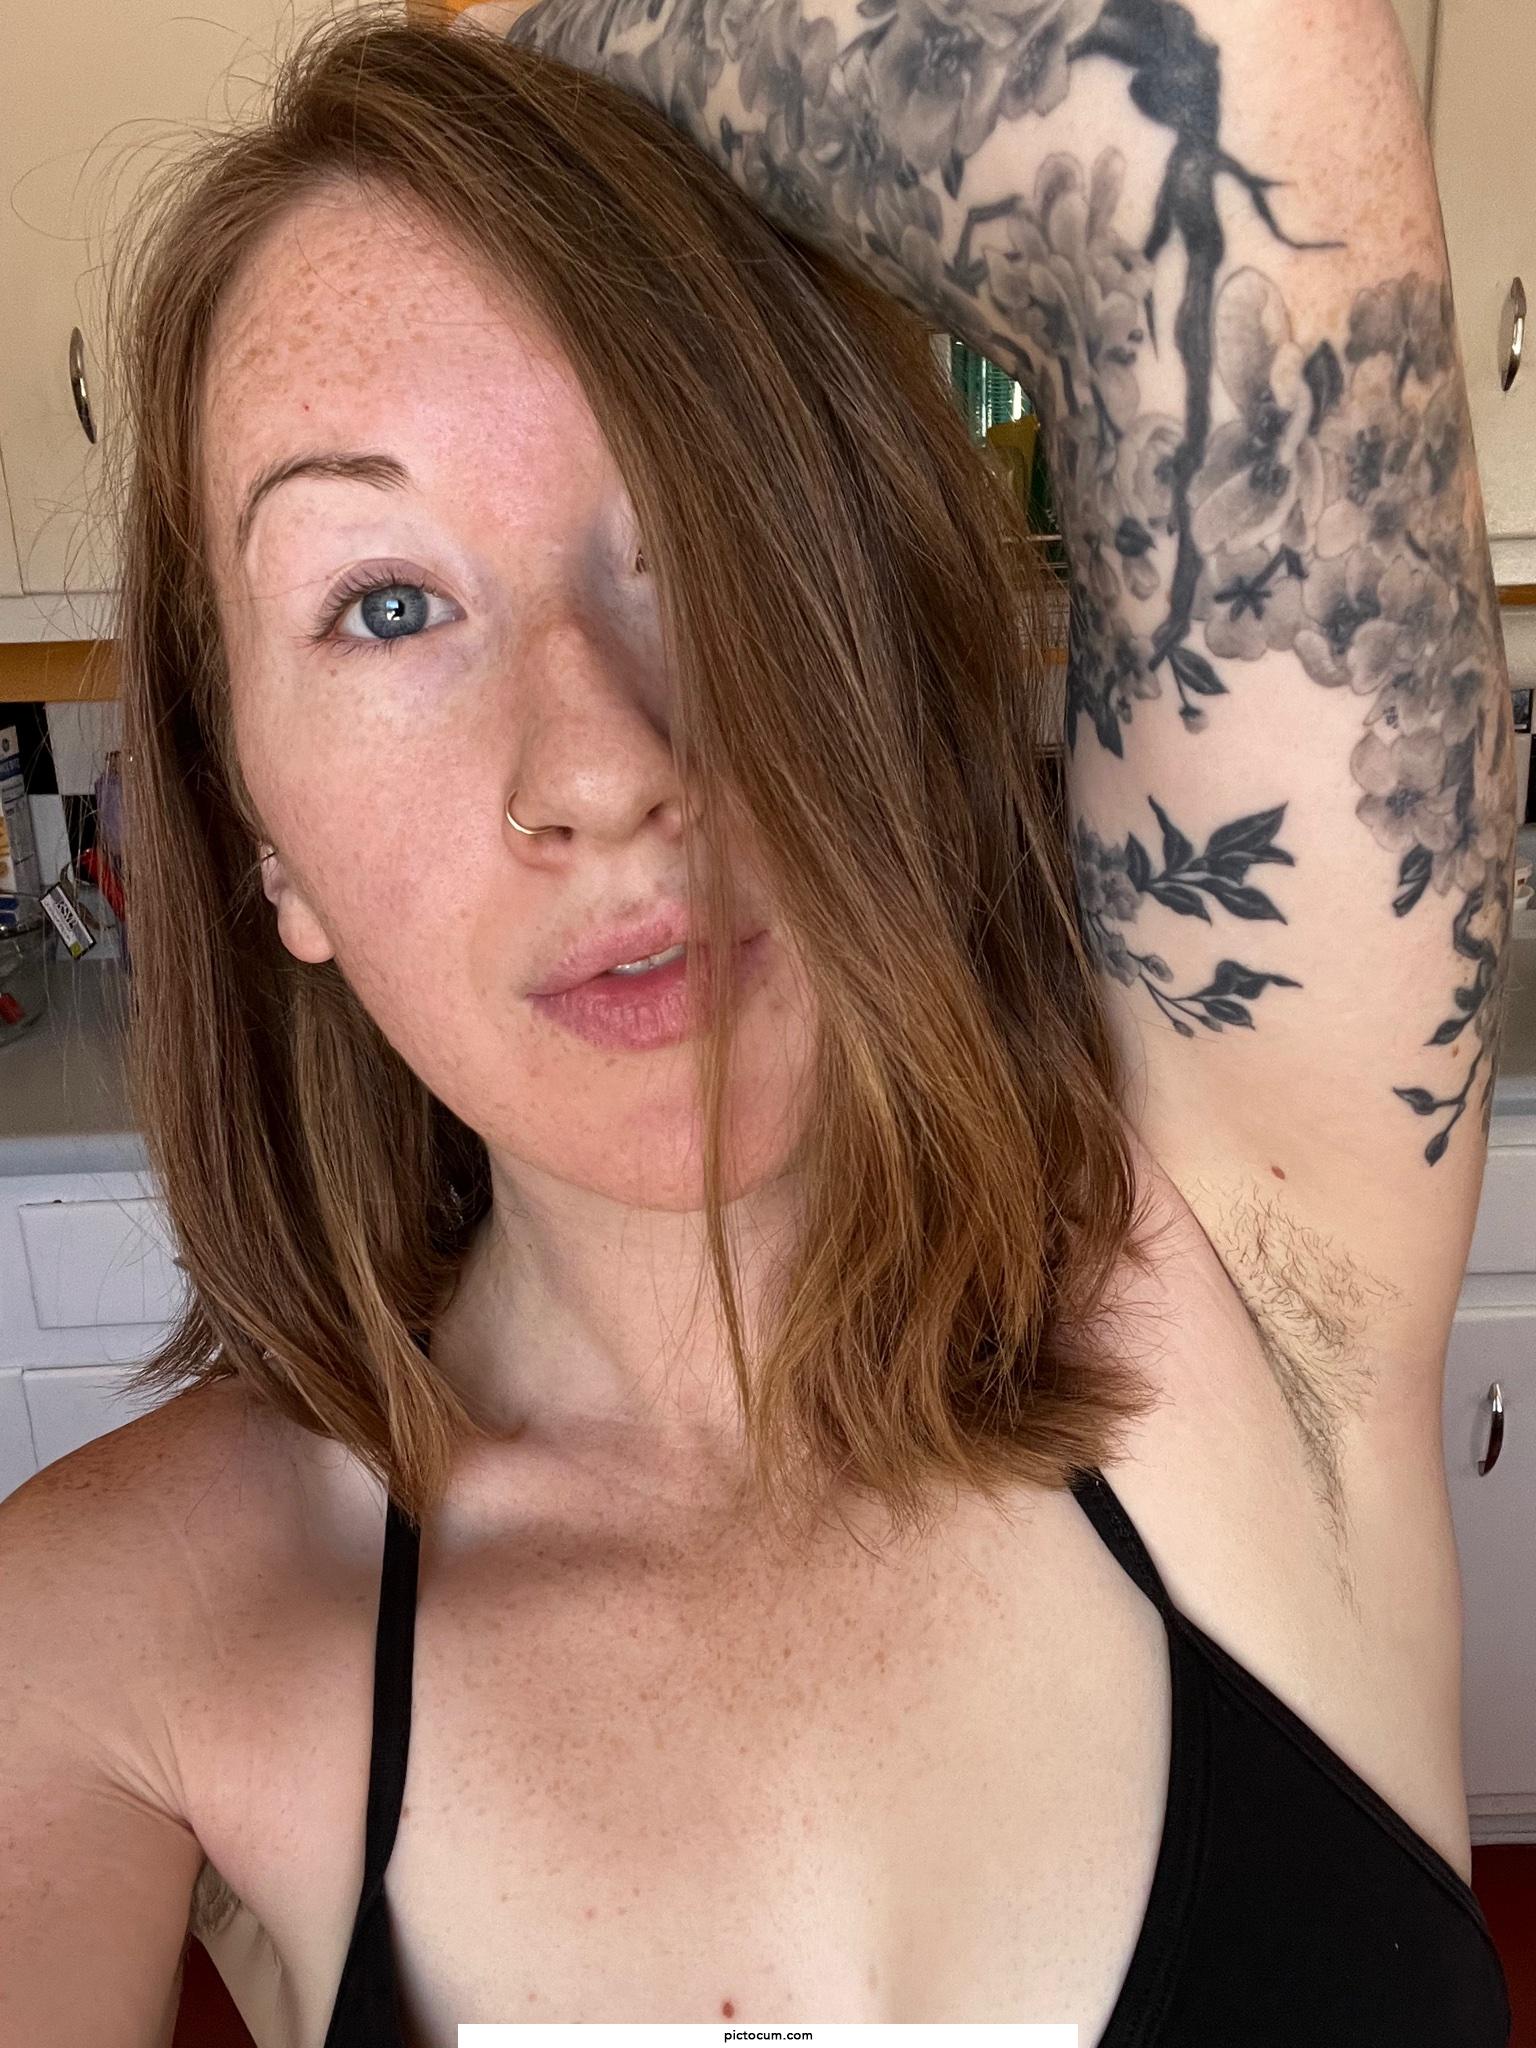 Freckles, tattoos, and hairy pits